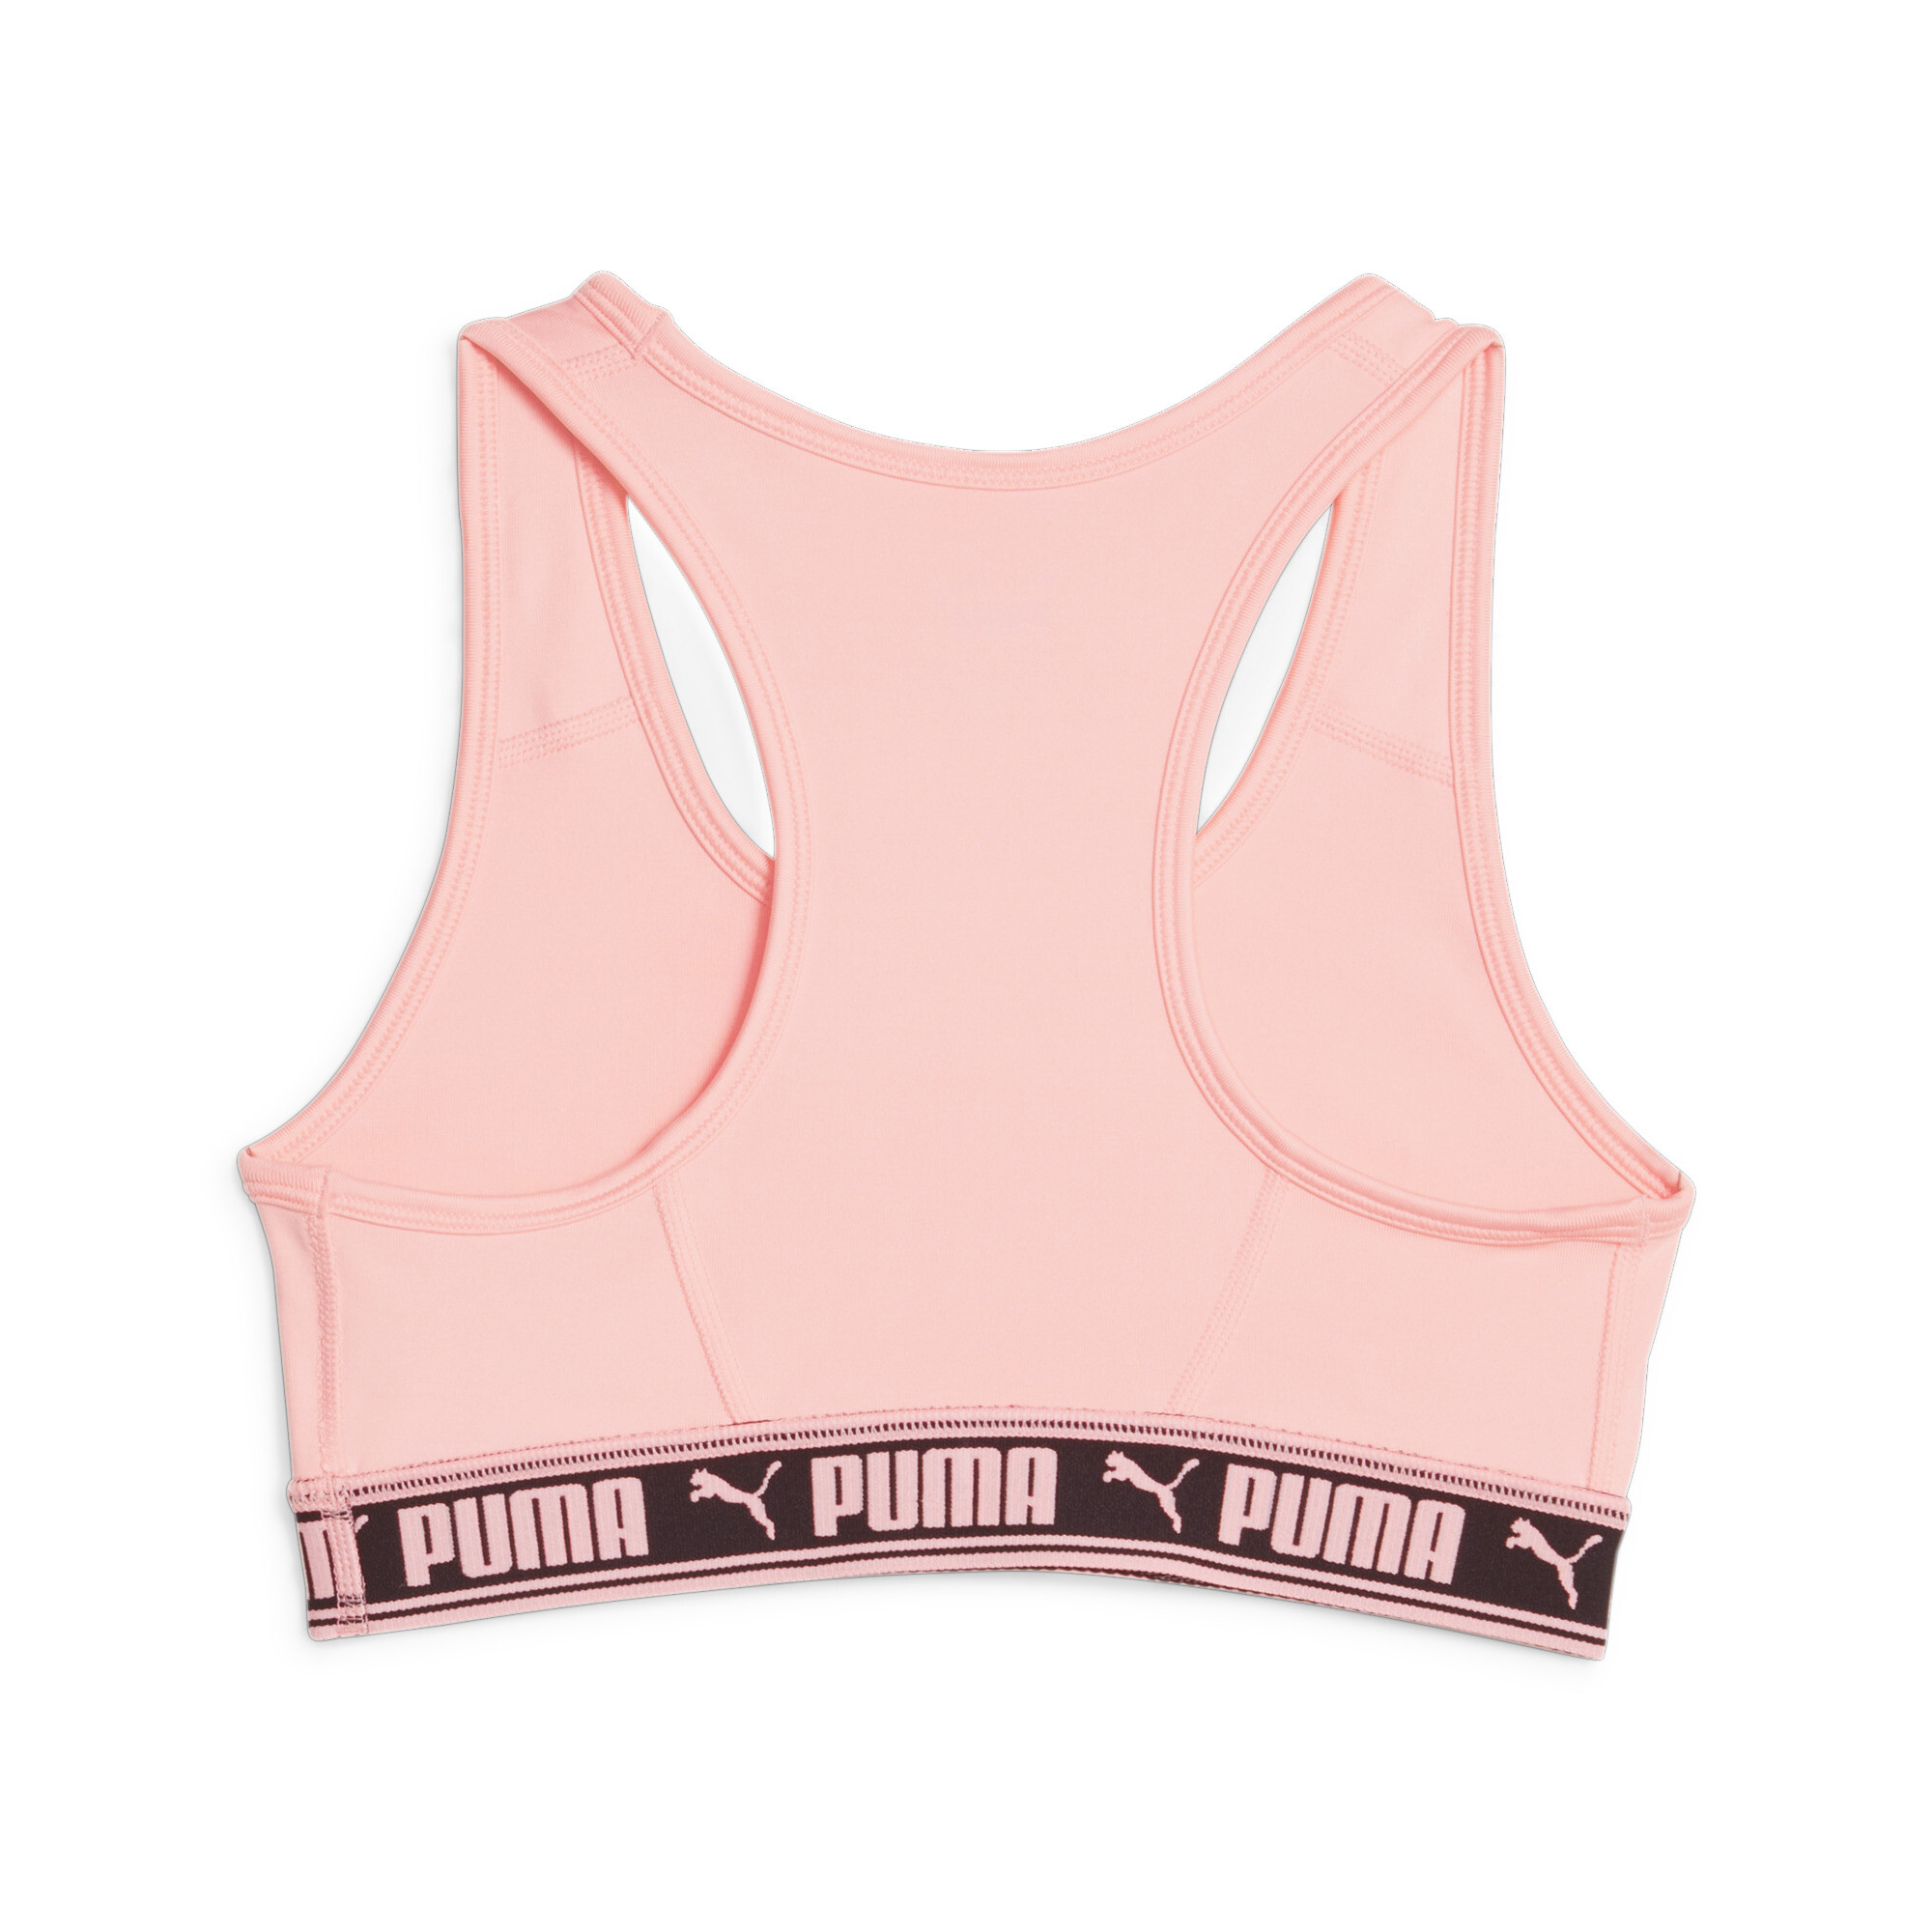 Women's Puma Strong Bra Youth, Pink, Size 11-12Y, Clothing